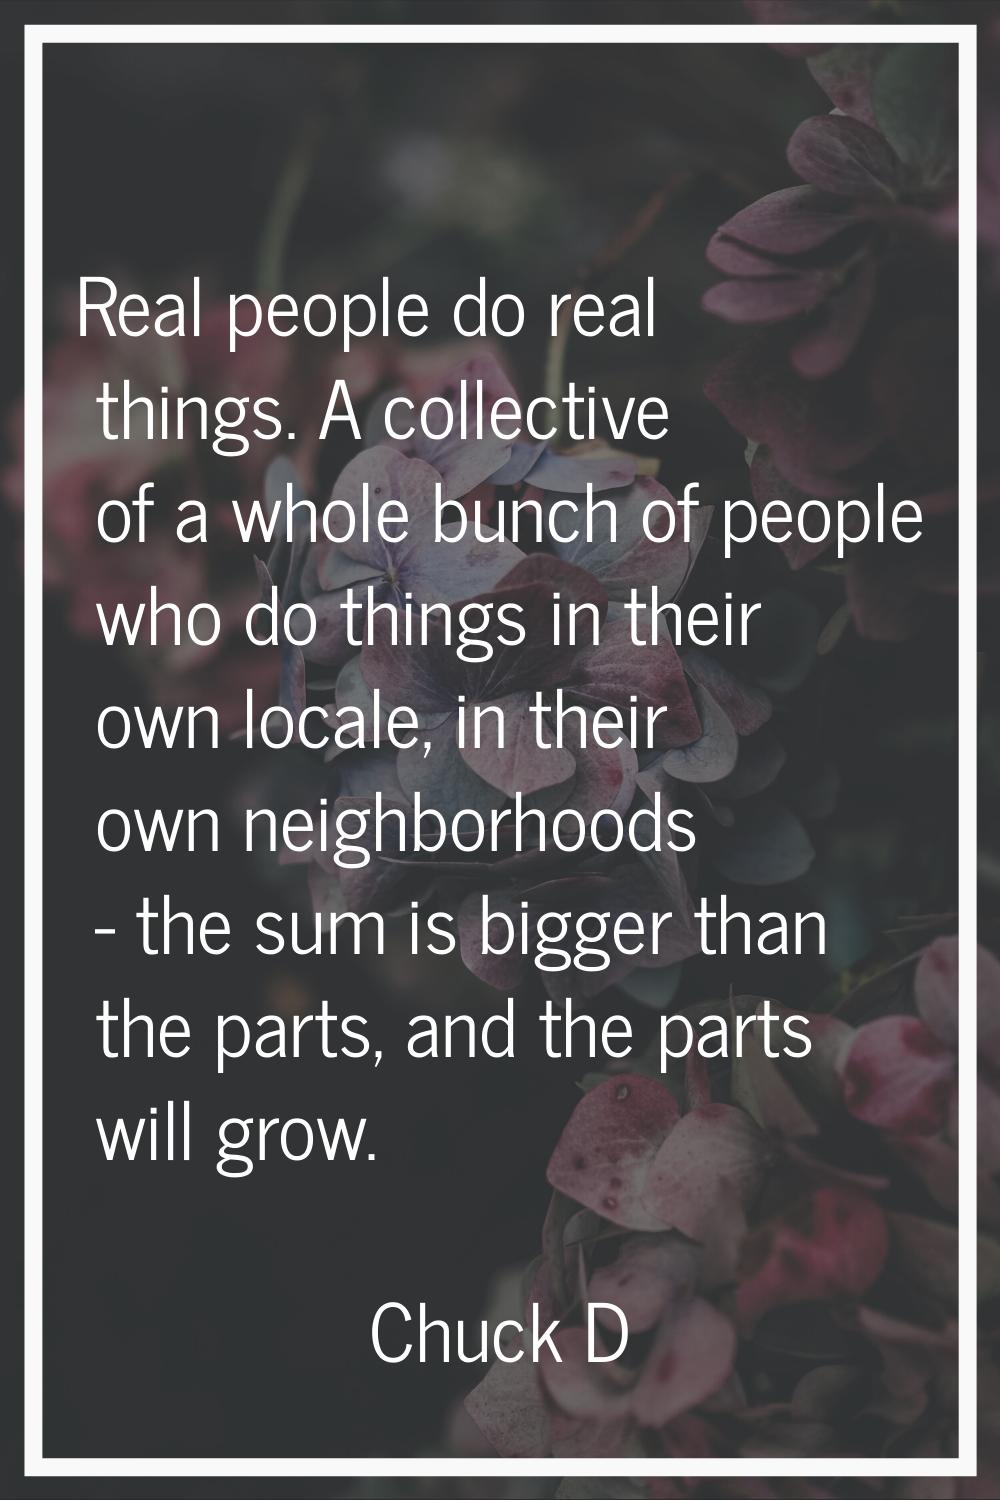 Real people do real things. A collective of a whole bunch of people who do things in their own loca